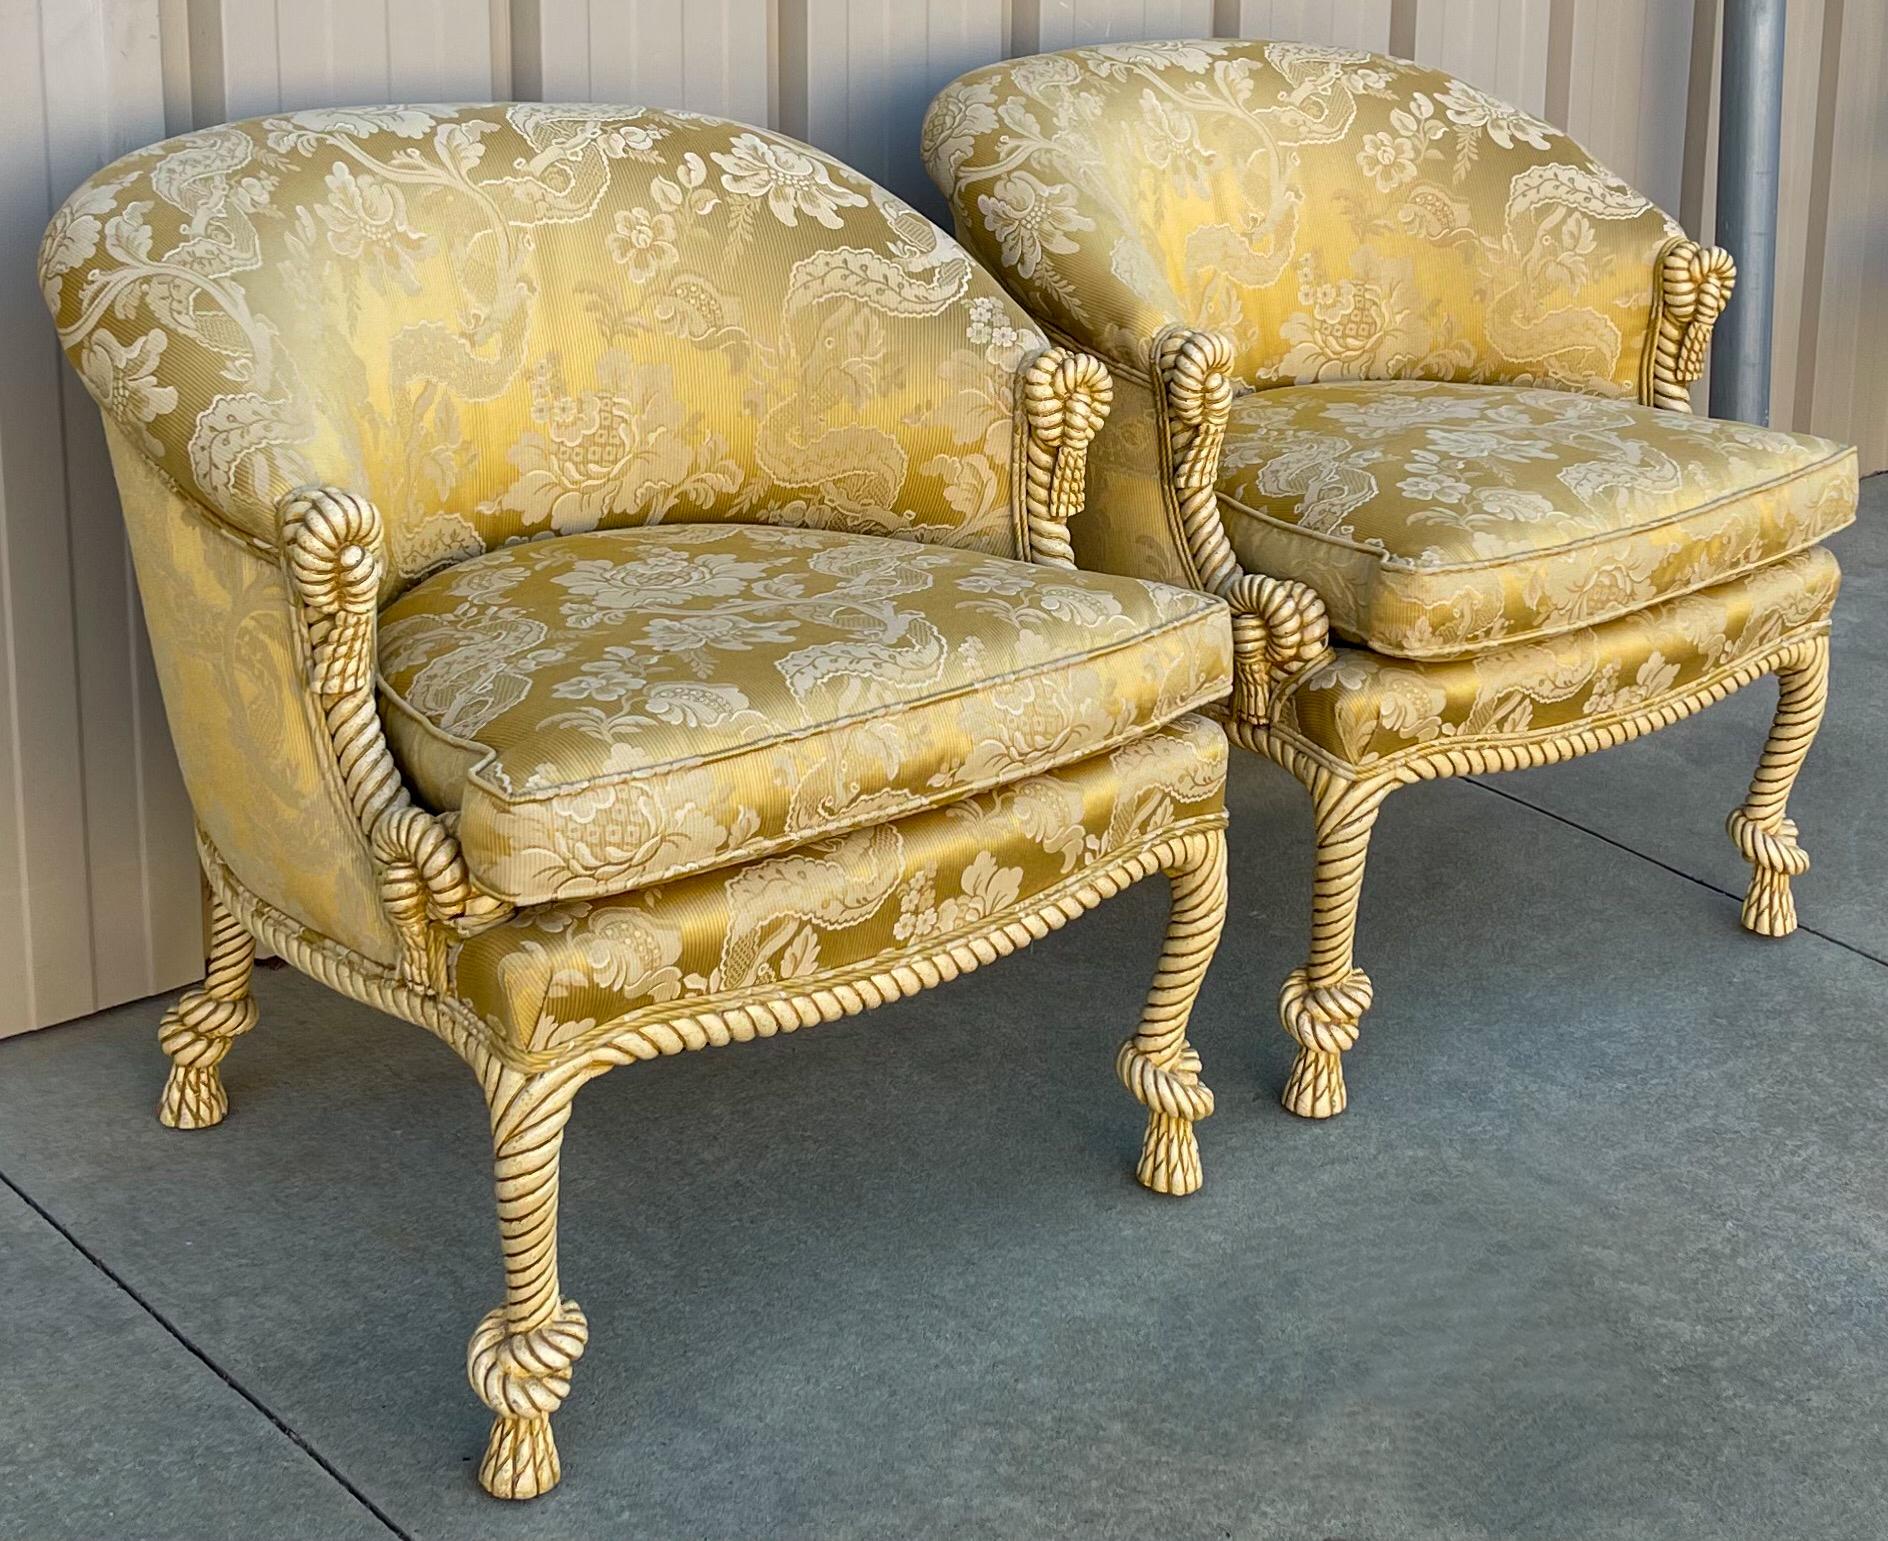 I love these! This is a pair of Hollywood Regency Era carved rope, tassel and knot chairs. The yellow/golden damask fabric is vintage but in very good condition as is the frame. They are unmarked.